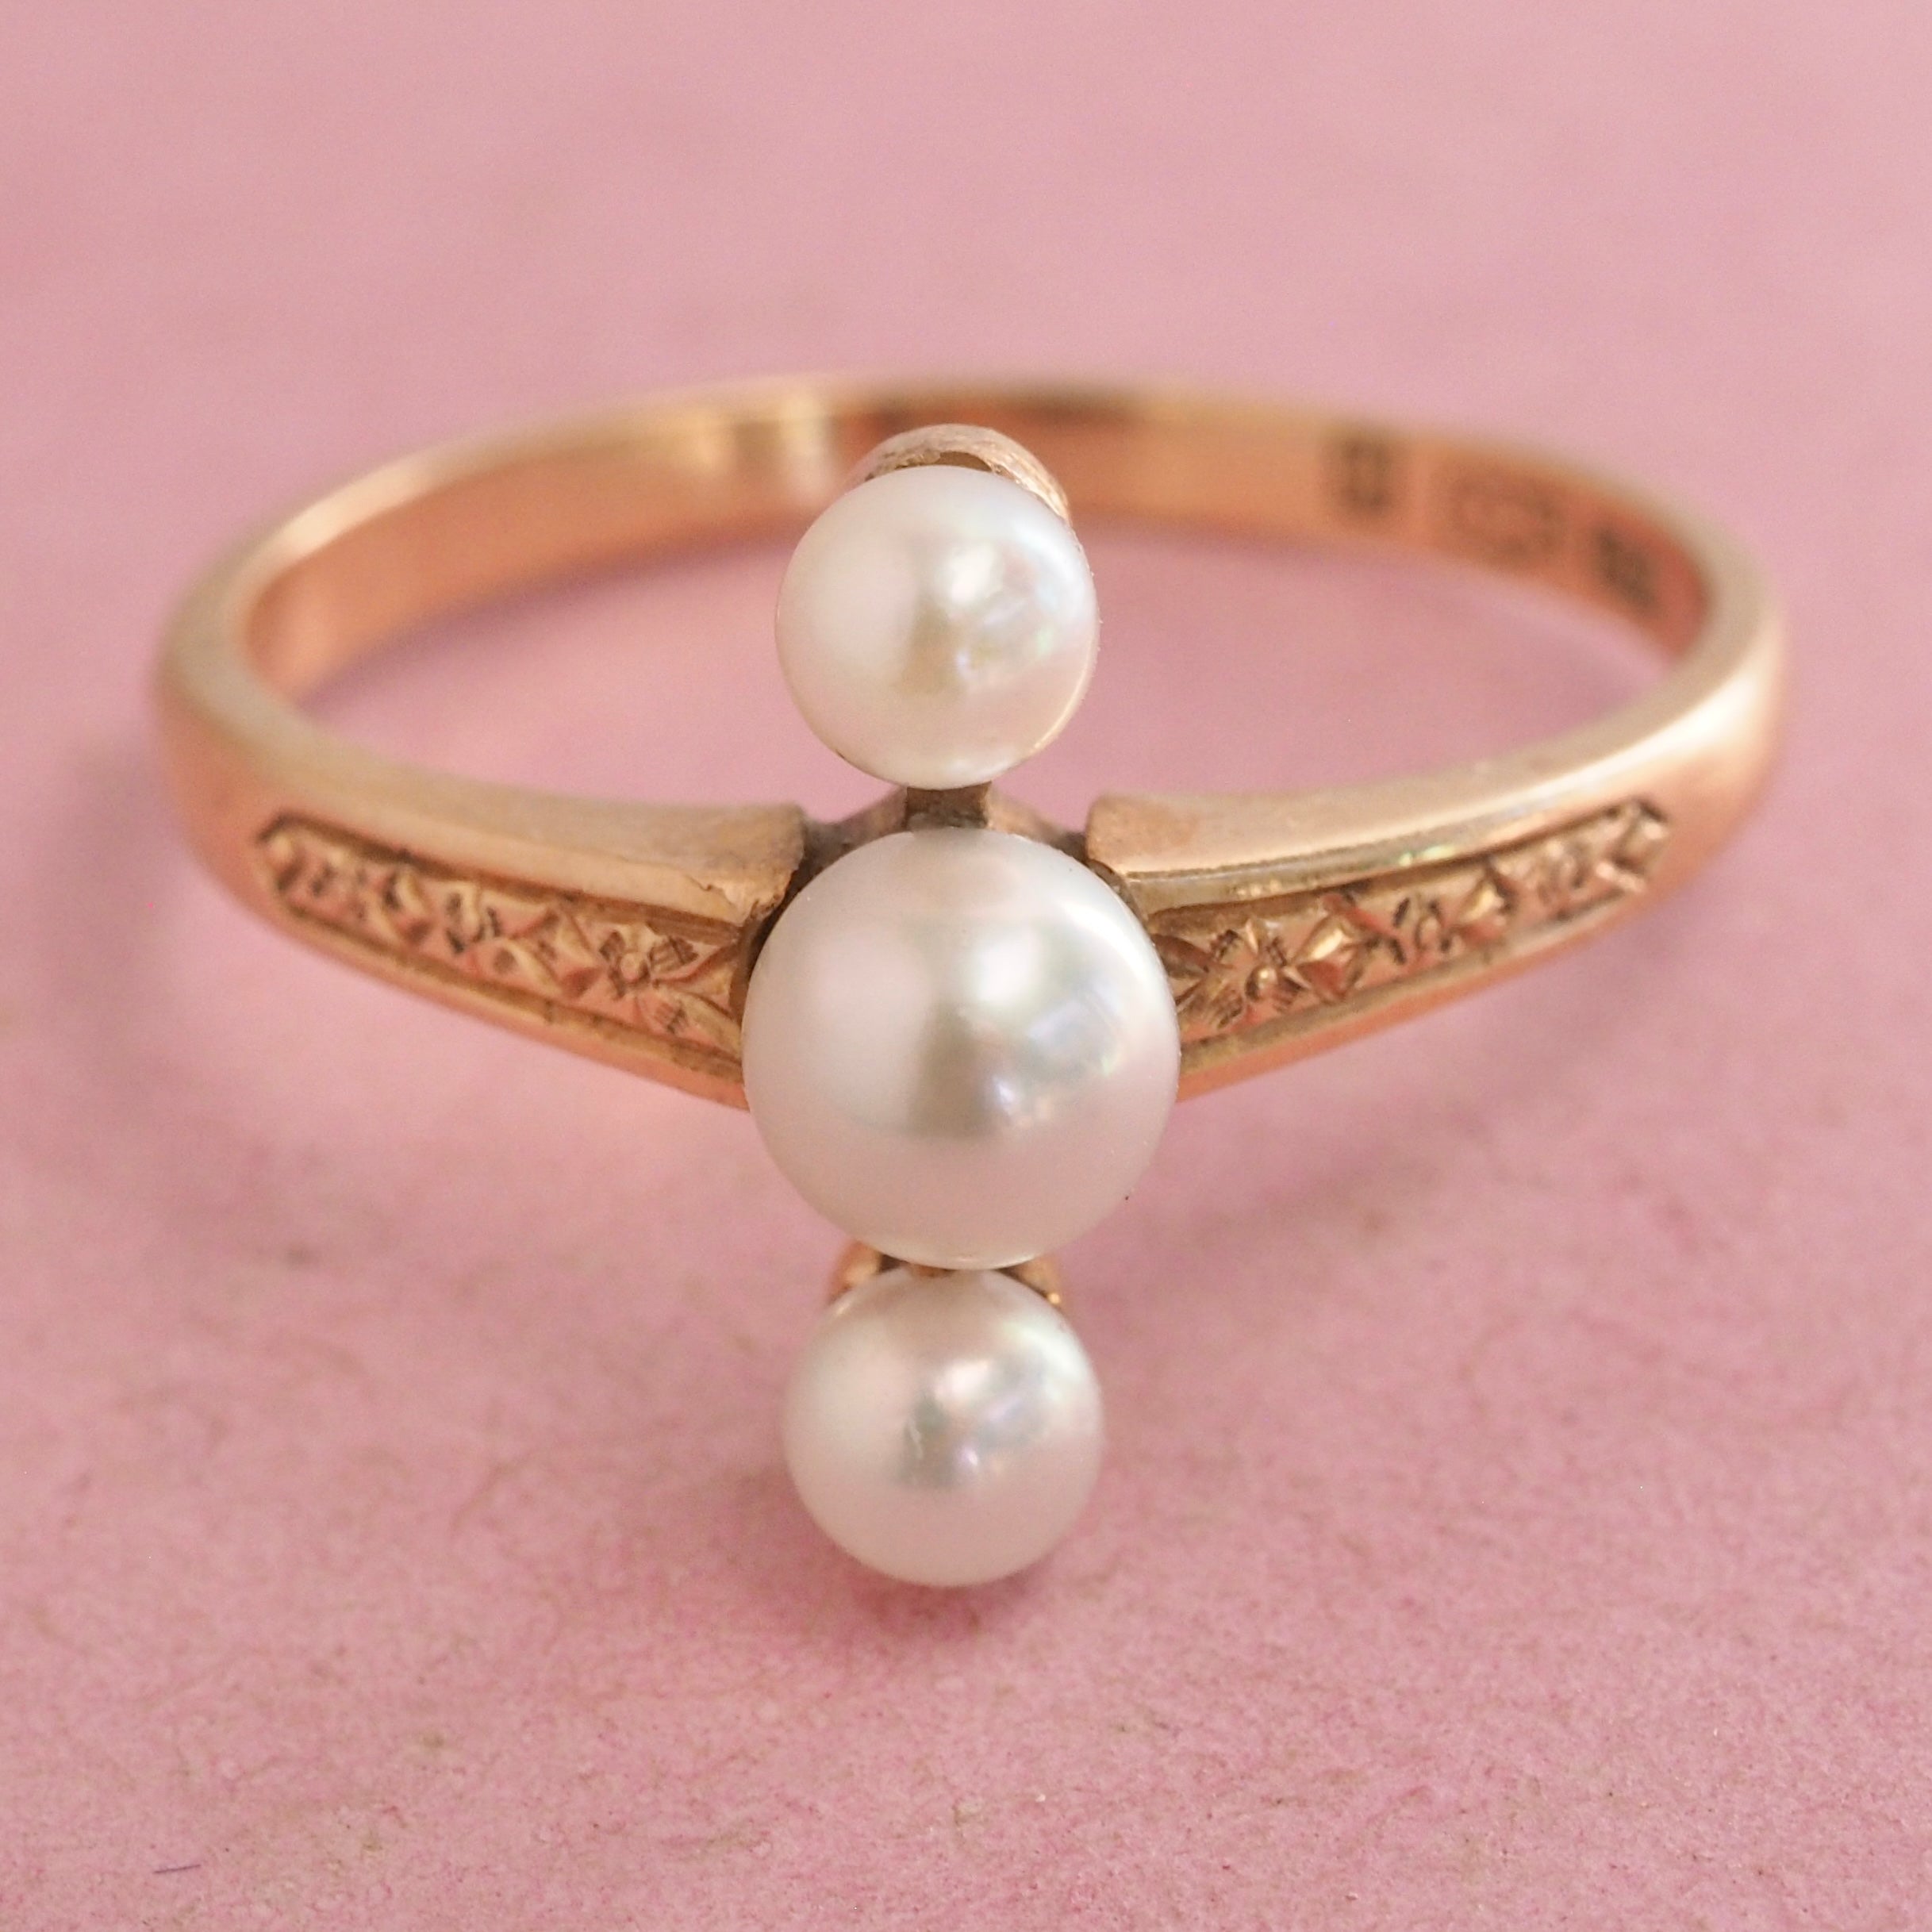 Antique Edwardian 14k Gold Three Pearl Vertical Ring